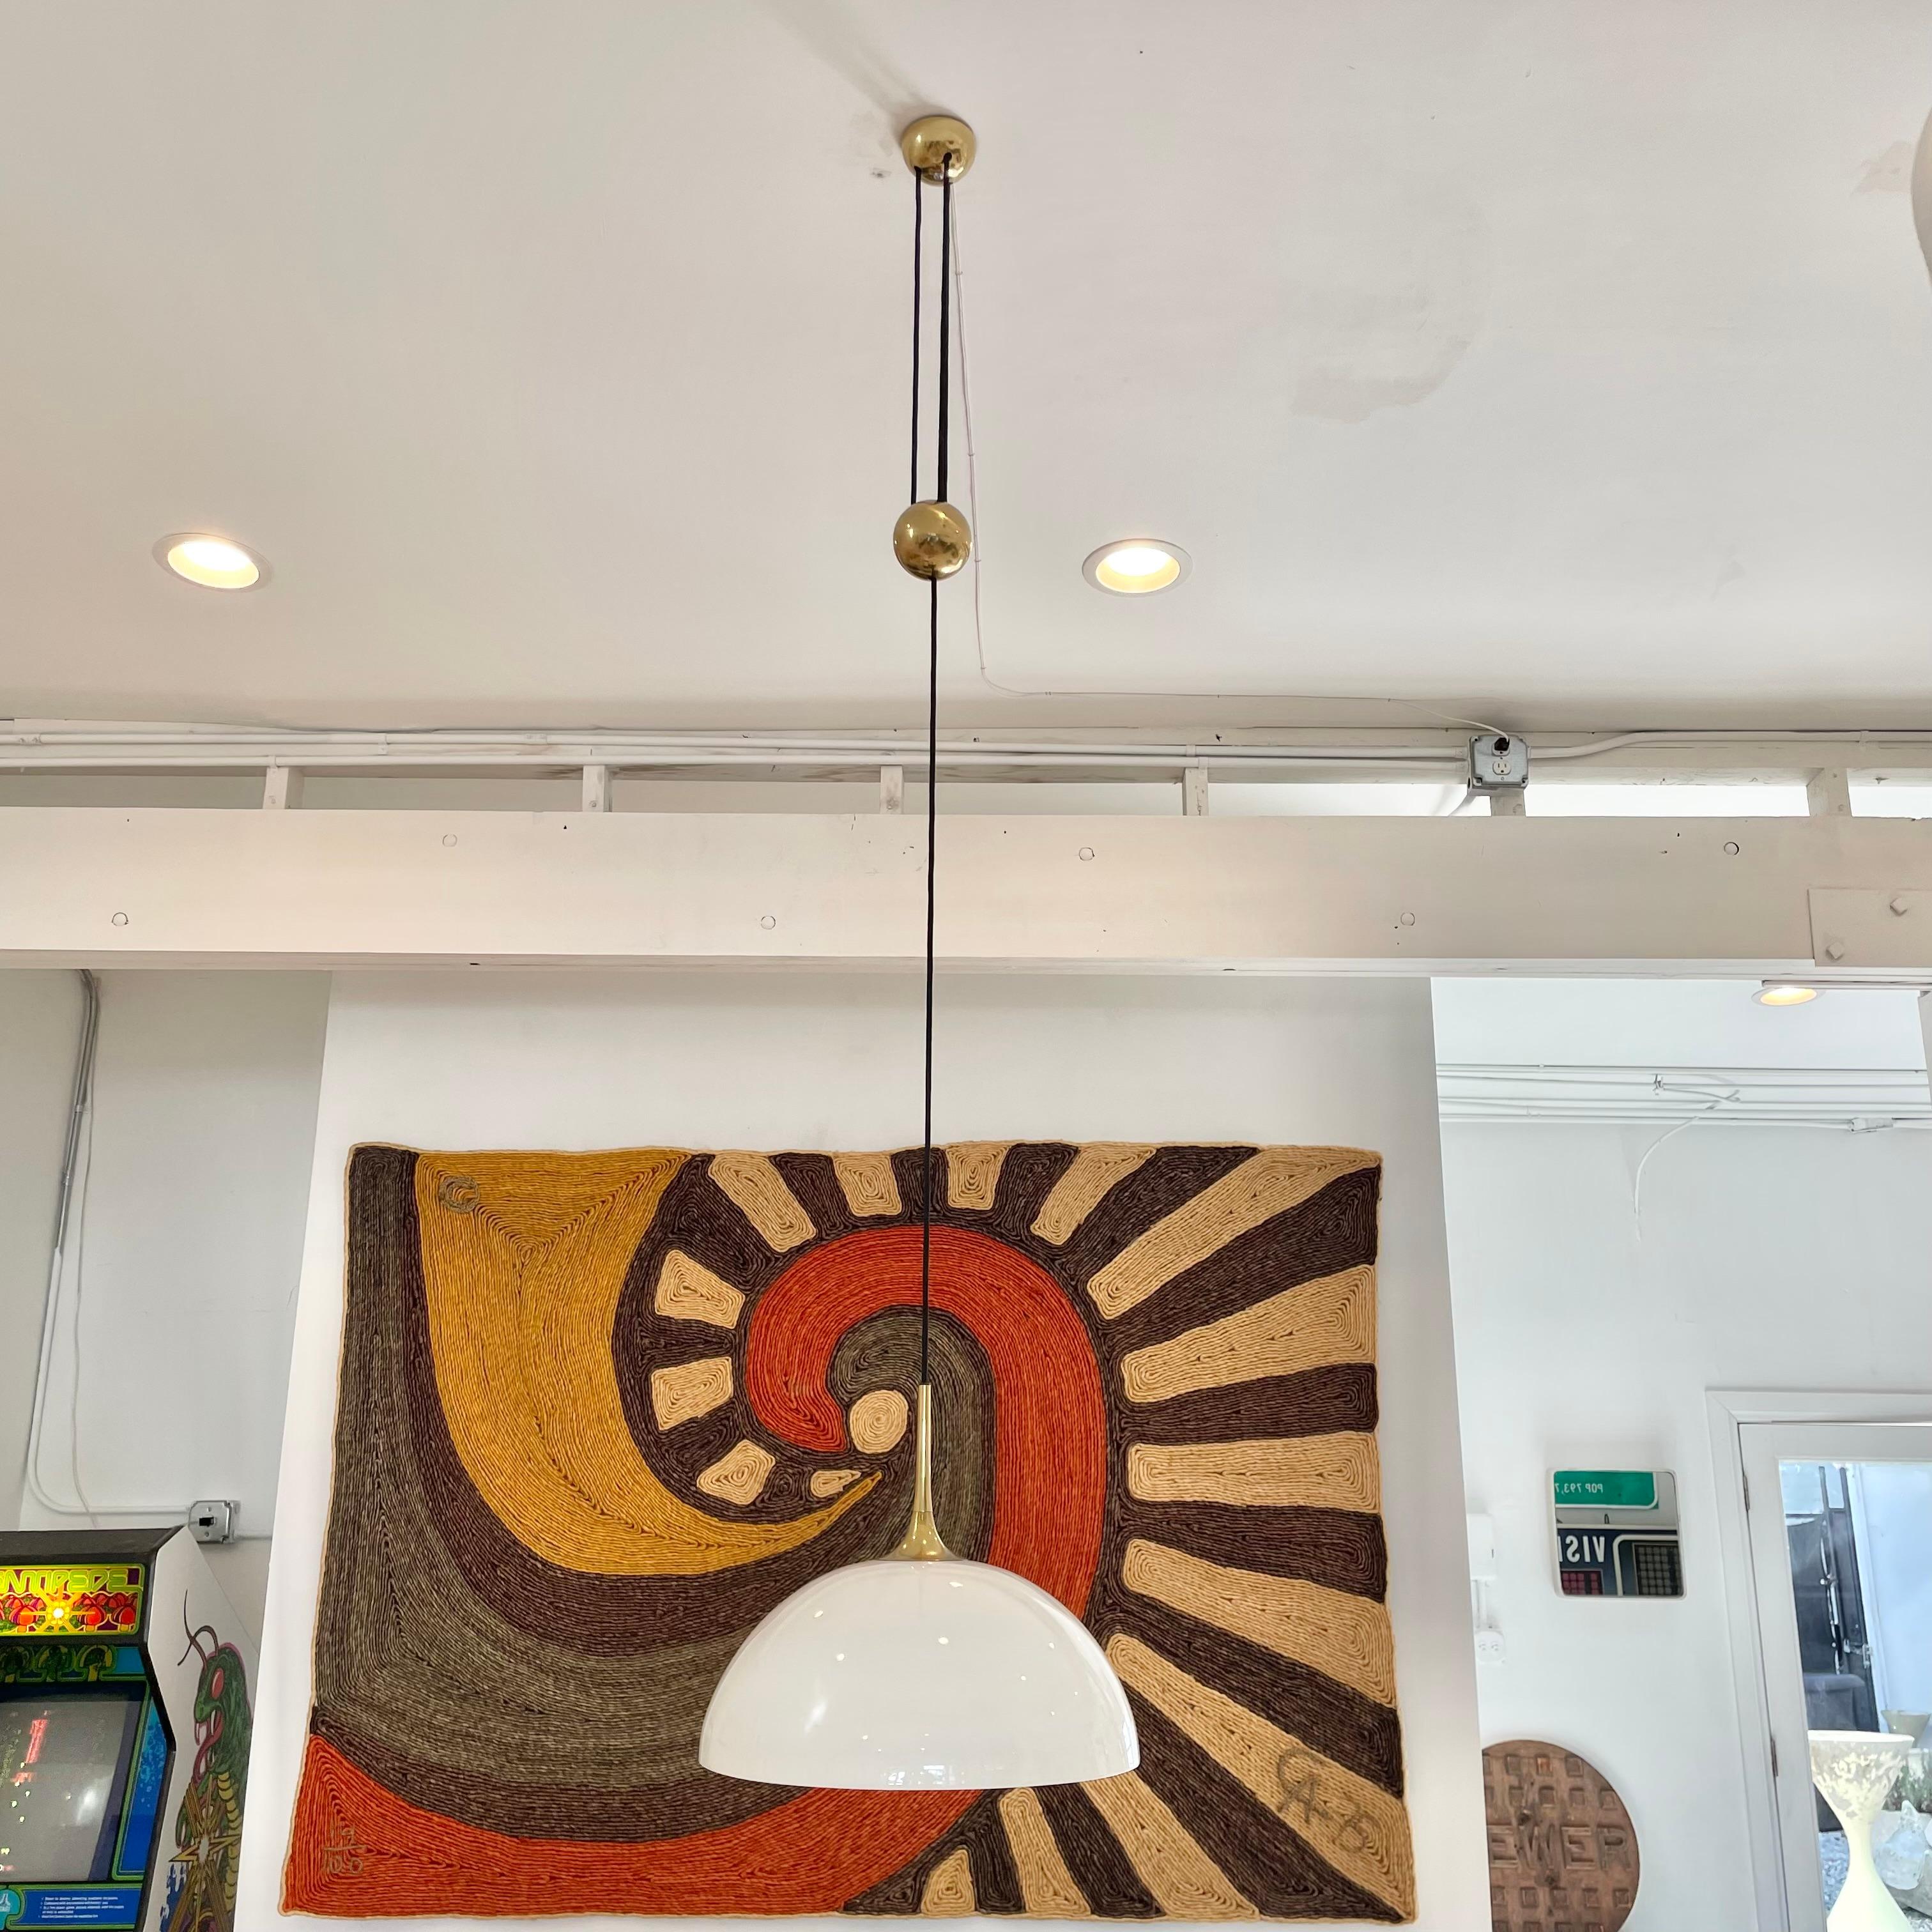 Rare Florian Schulz Counter Balance Light with Ceramic Shade, Germany 1970s In Good Condition For Sale In Los Angeles, CA